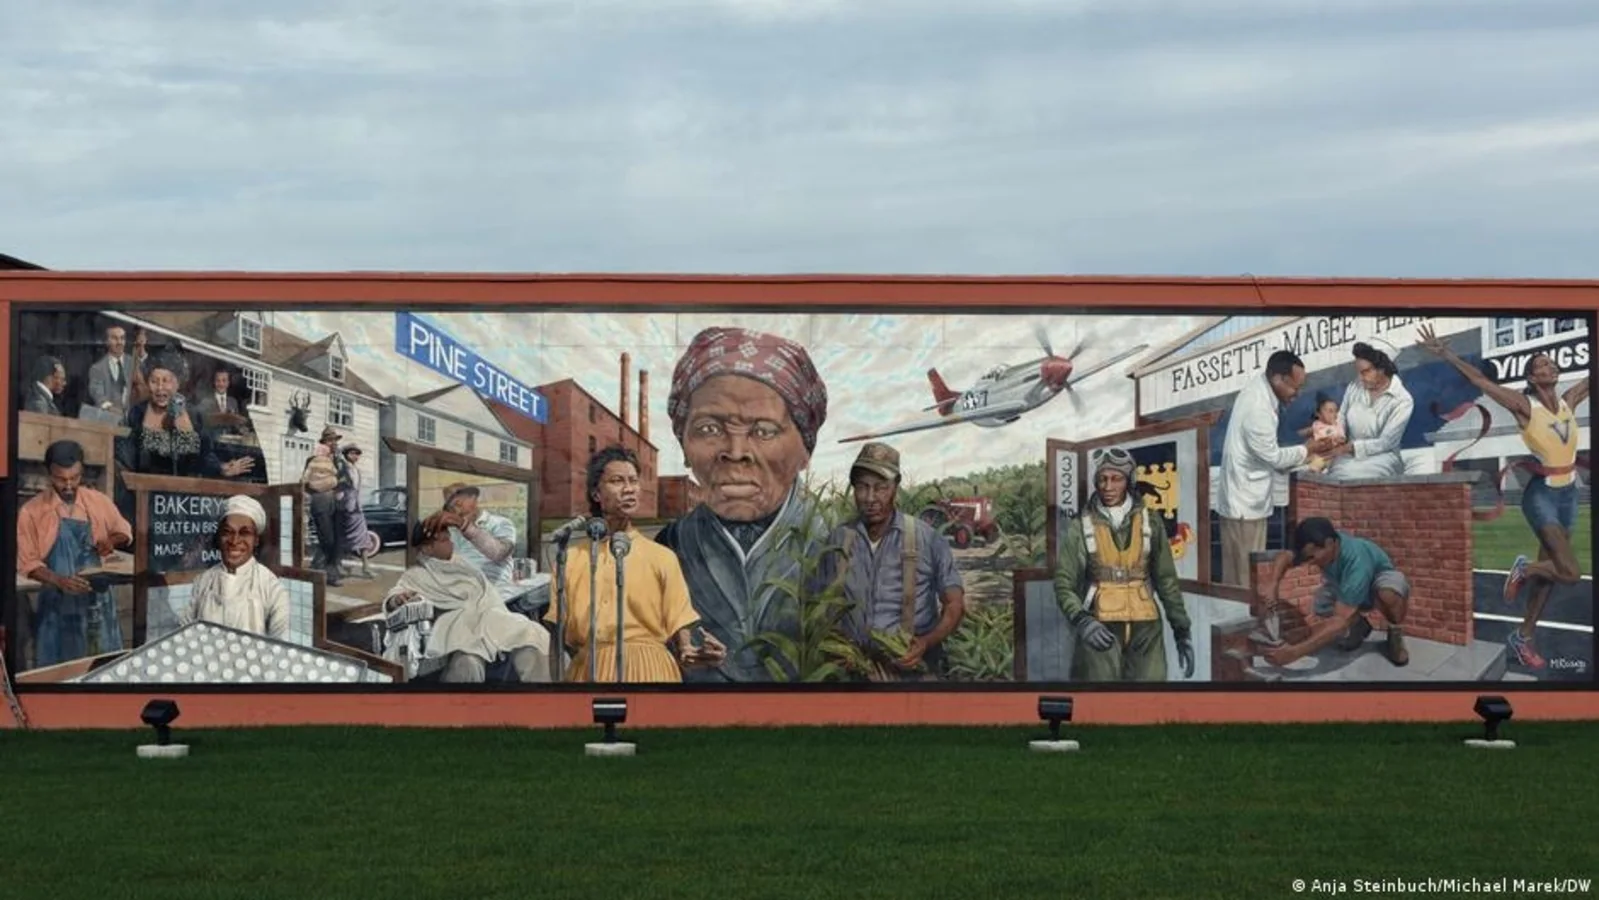 The Harriet Tubman mural that transcends time